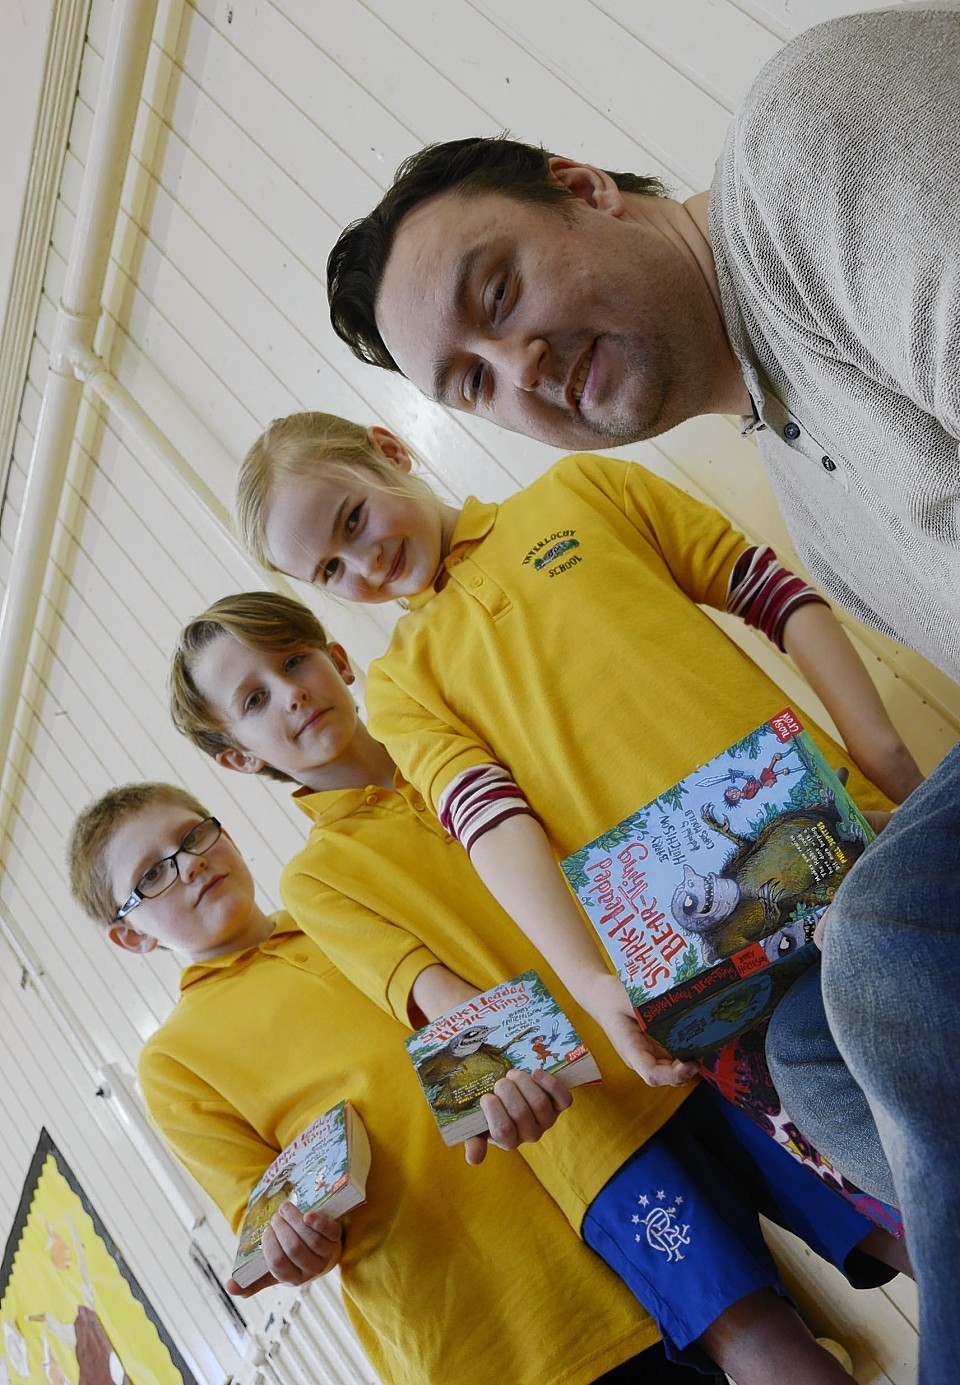 Children's author Barry Hutchison signs copies of his latest book The Shark Headed Bear Thing for Daniel Turner, Archie Bowman and Jasmyn Fox Gillies